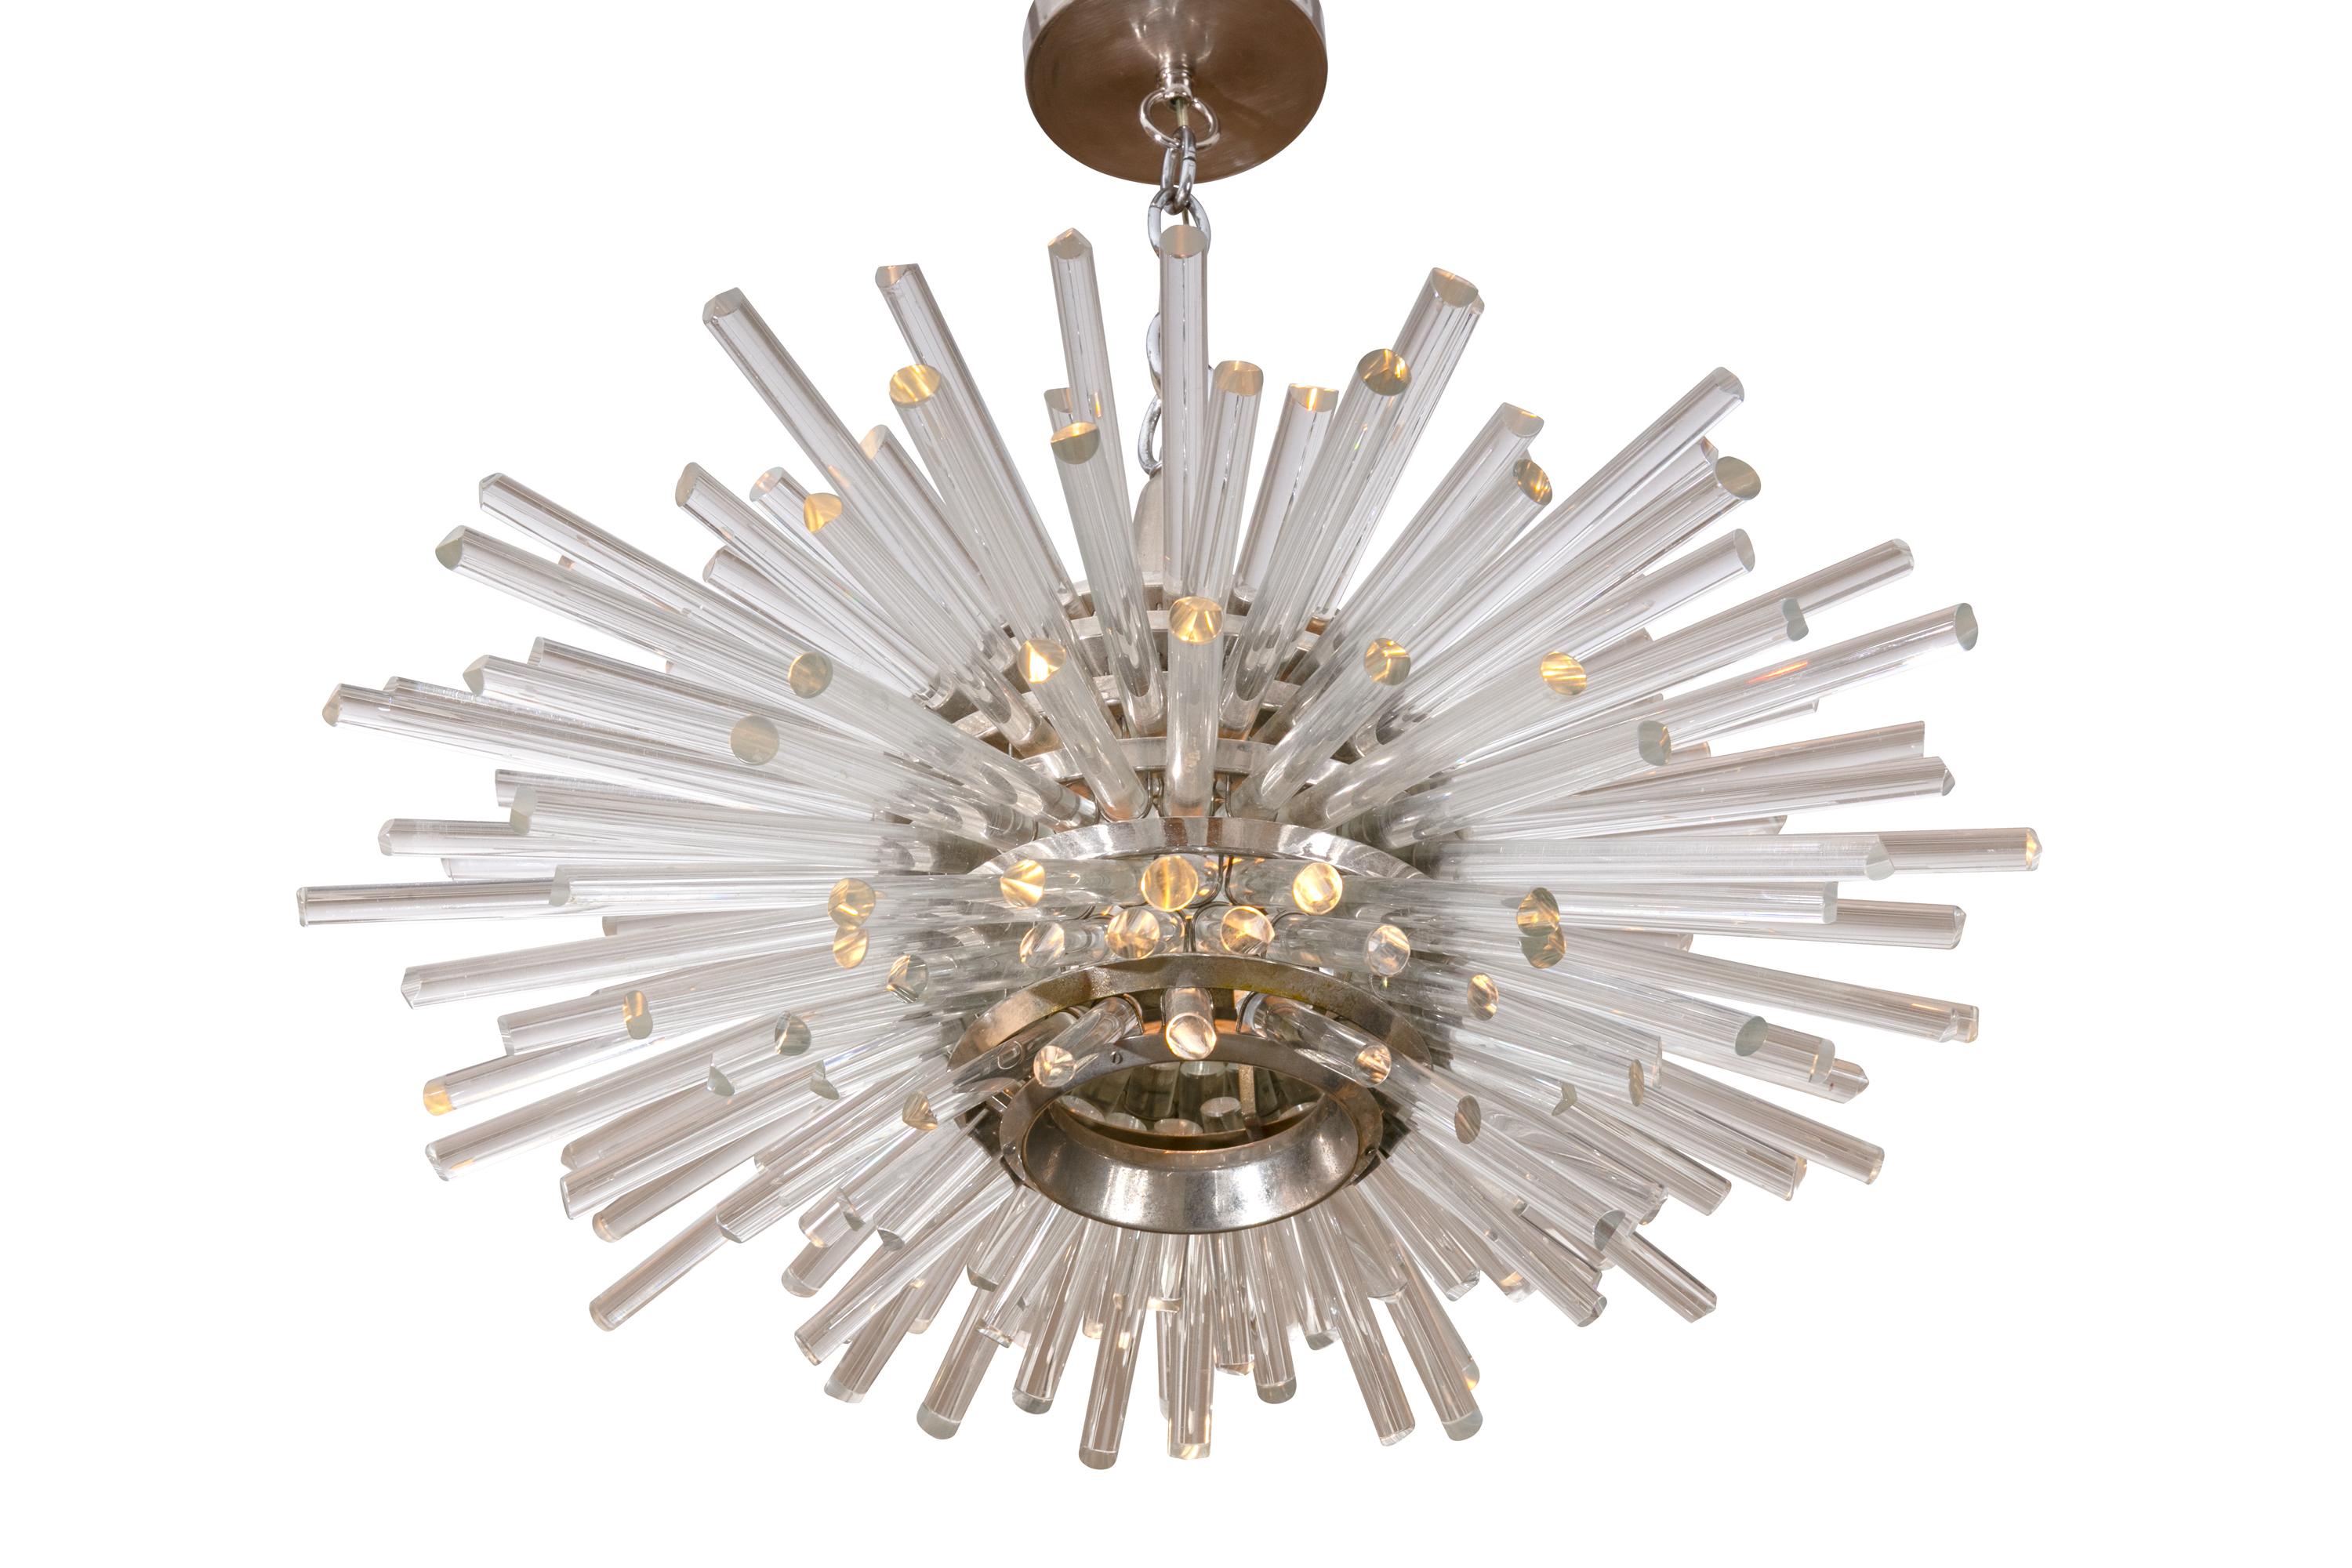 An unmistakably iconic design for obvious reasons. It's distinctive amongst the numerous Sputnik lights from the midcentury partly due to the transmission of the light through the rods that creates an incomparable effect.